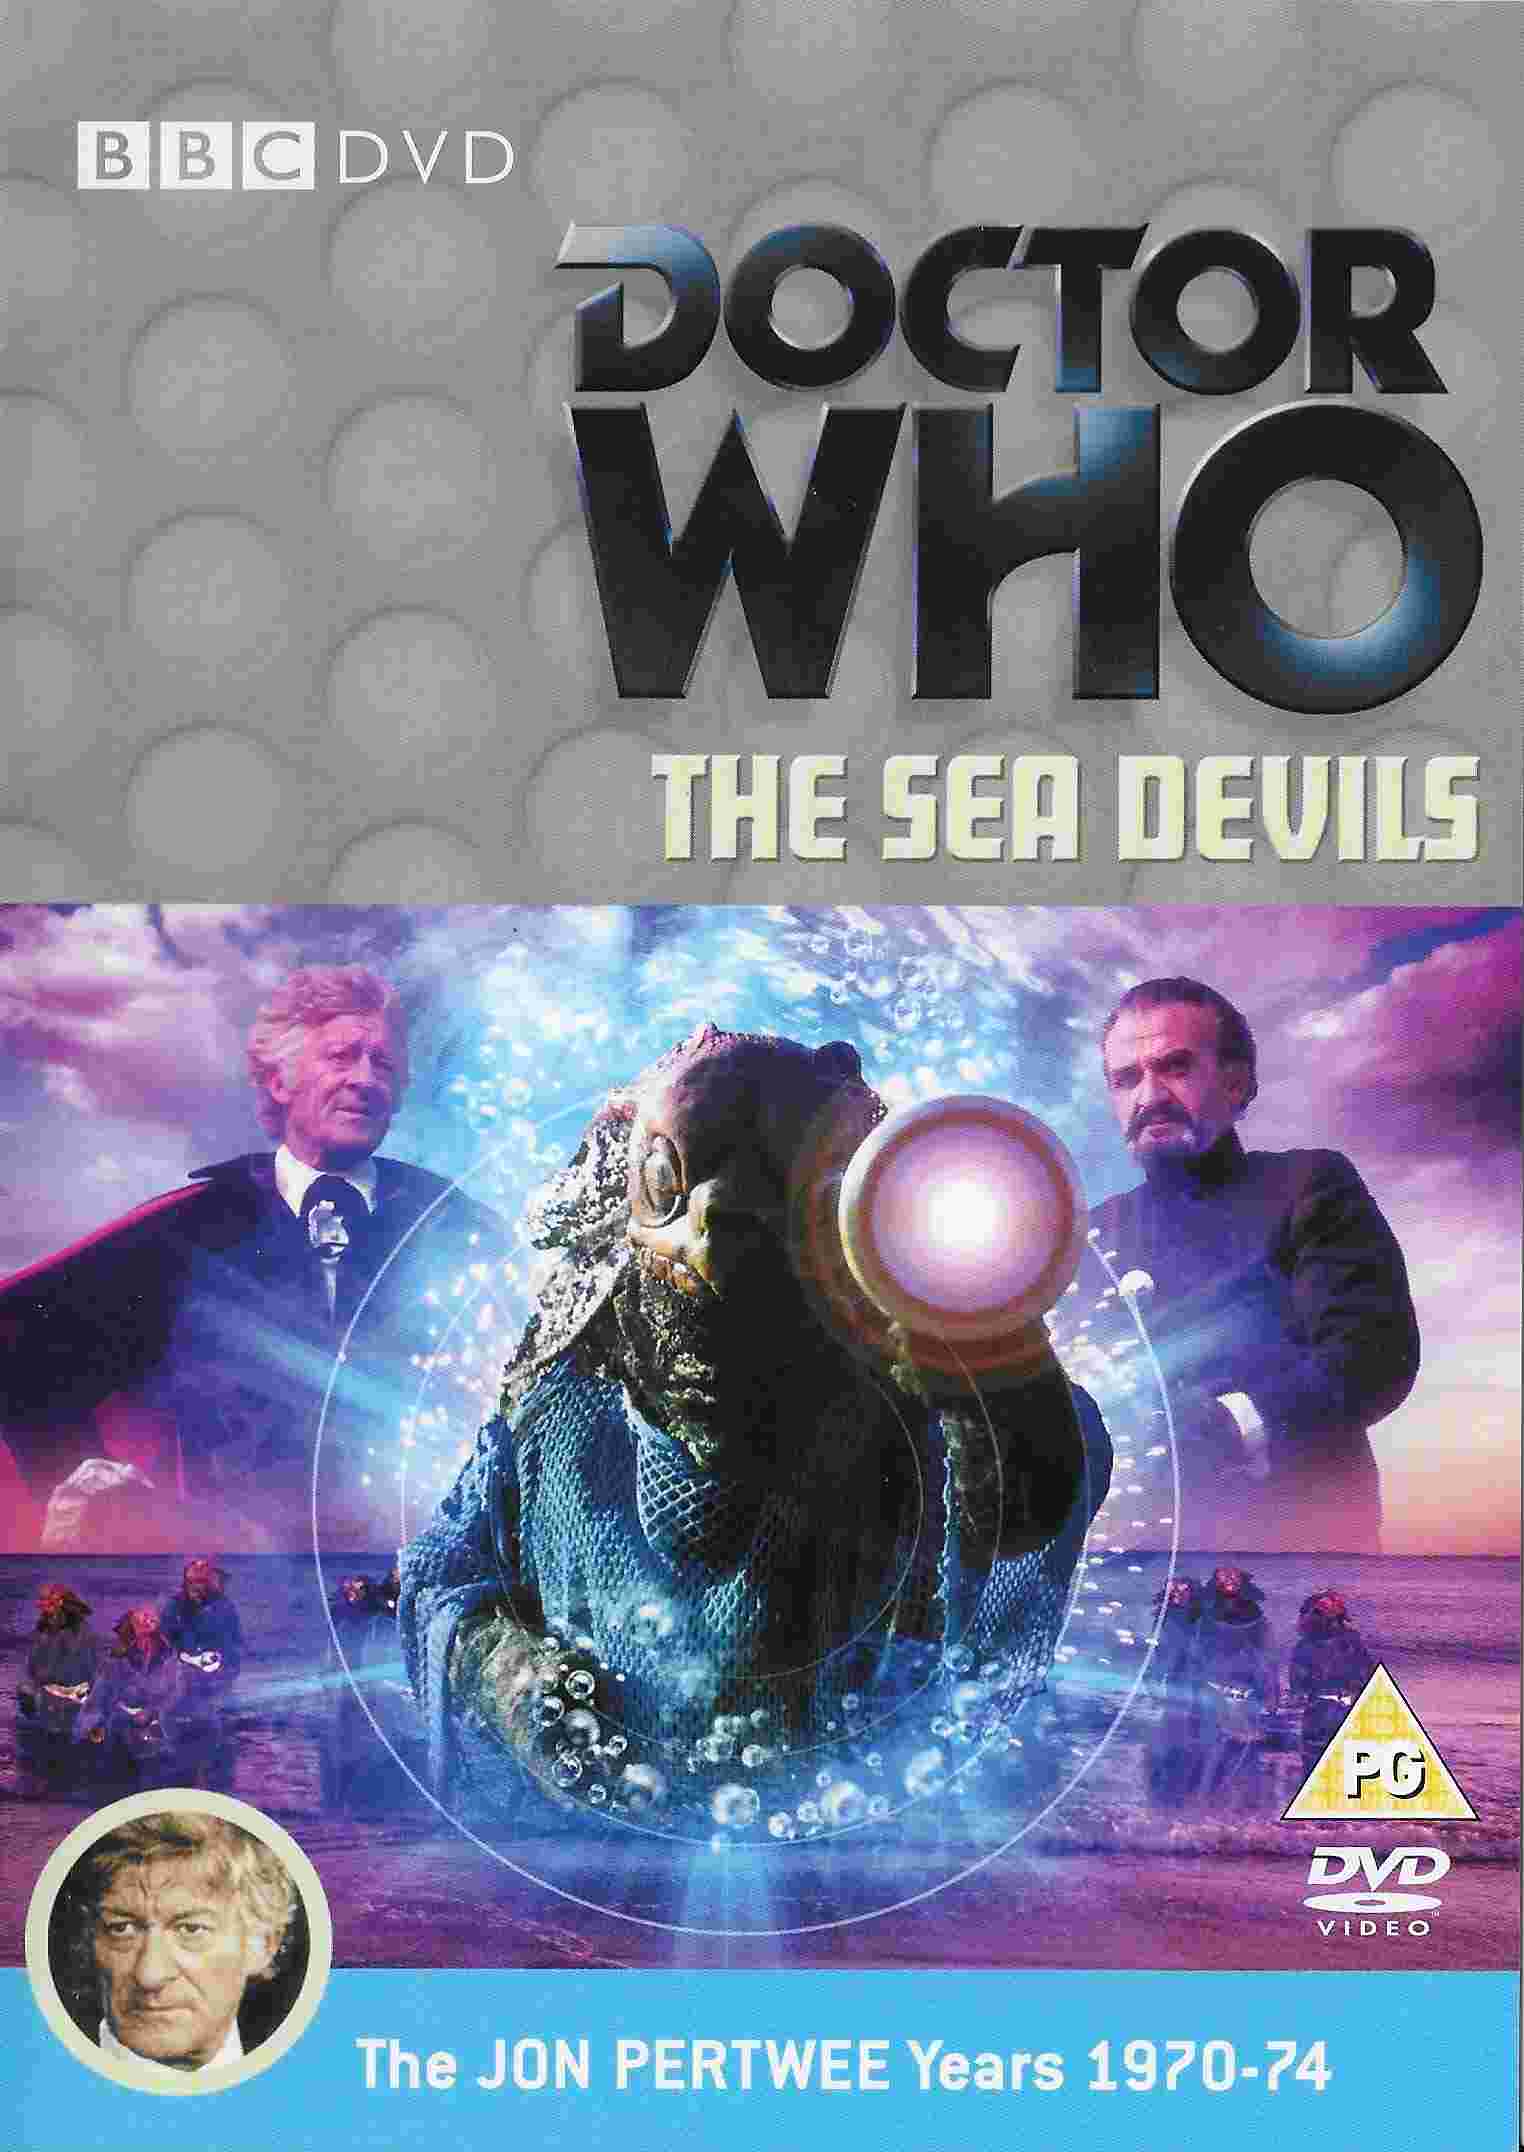 Picture of BBCDVD 2438B Doctor Who - The sea devils by artist Malcolm Hulke from the BBC dvds - Records and Tapes library